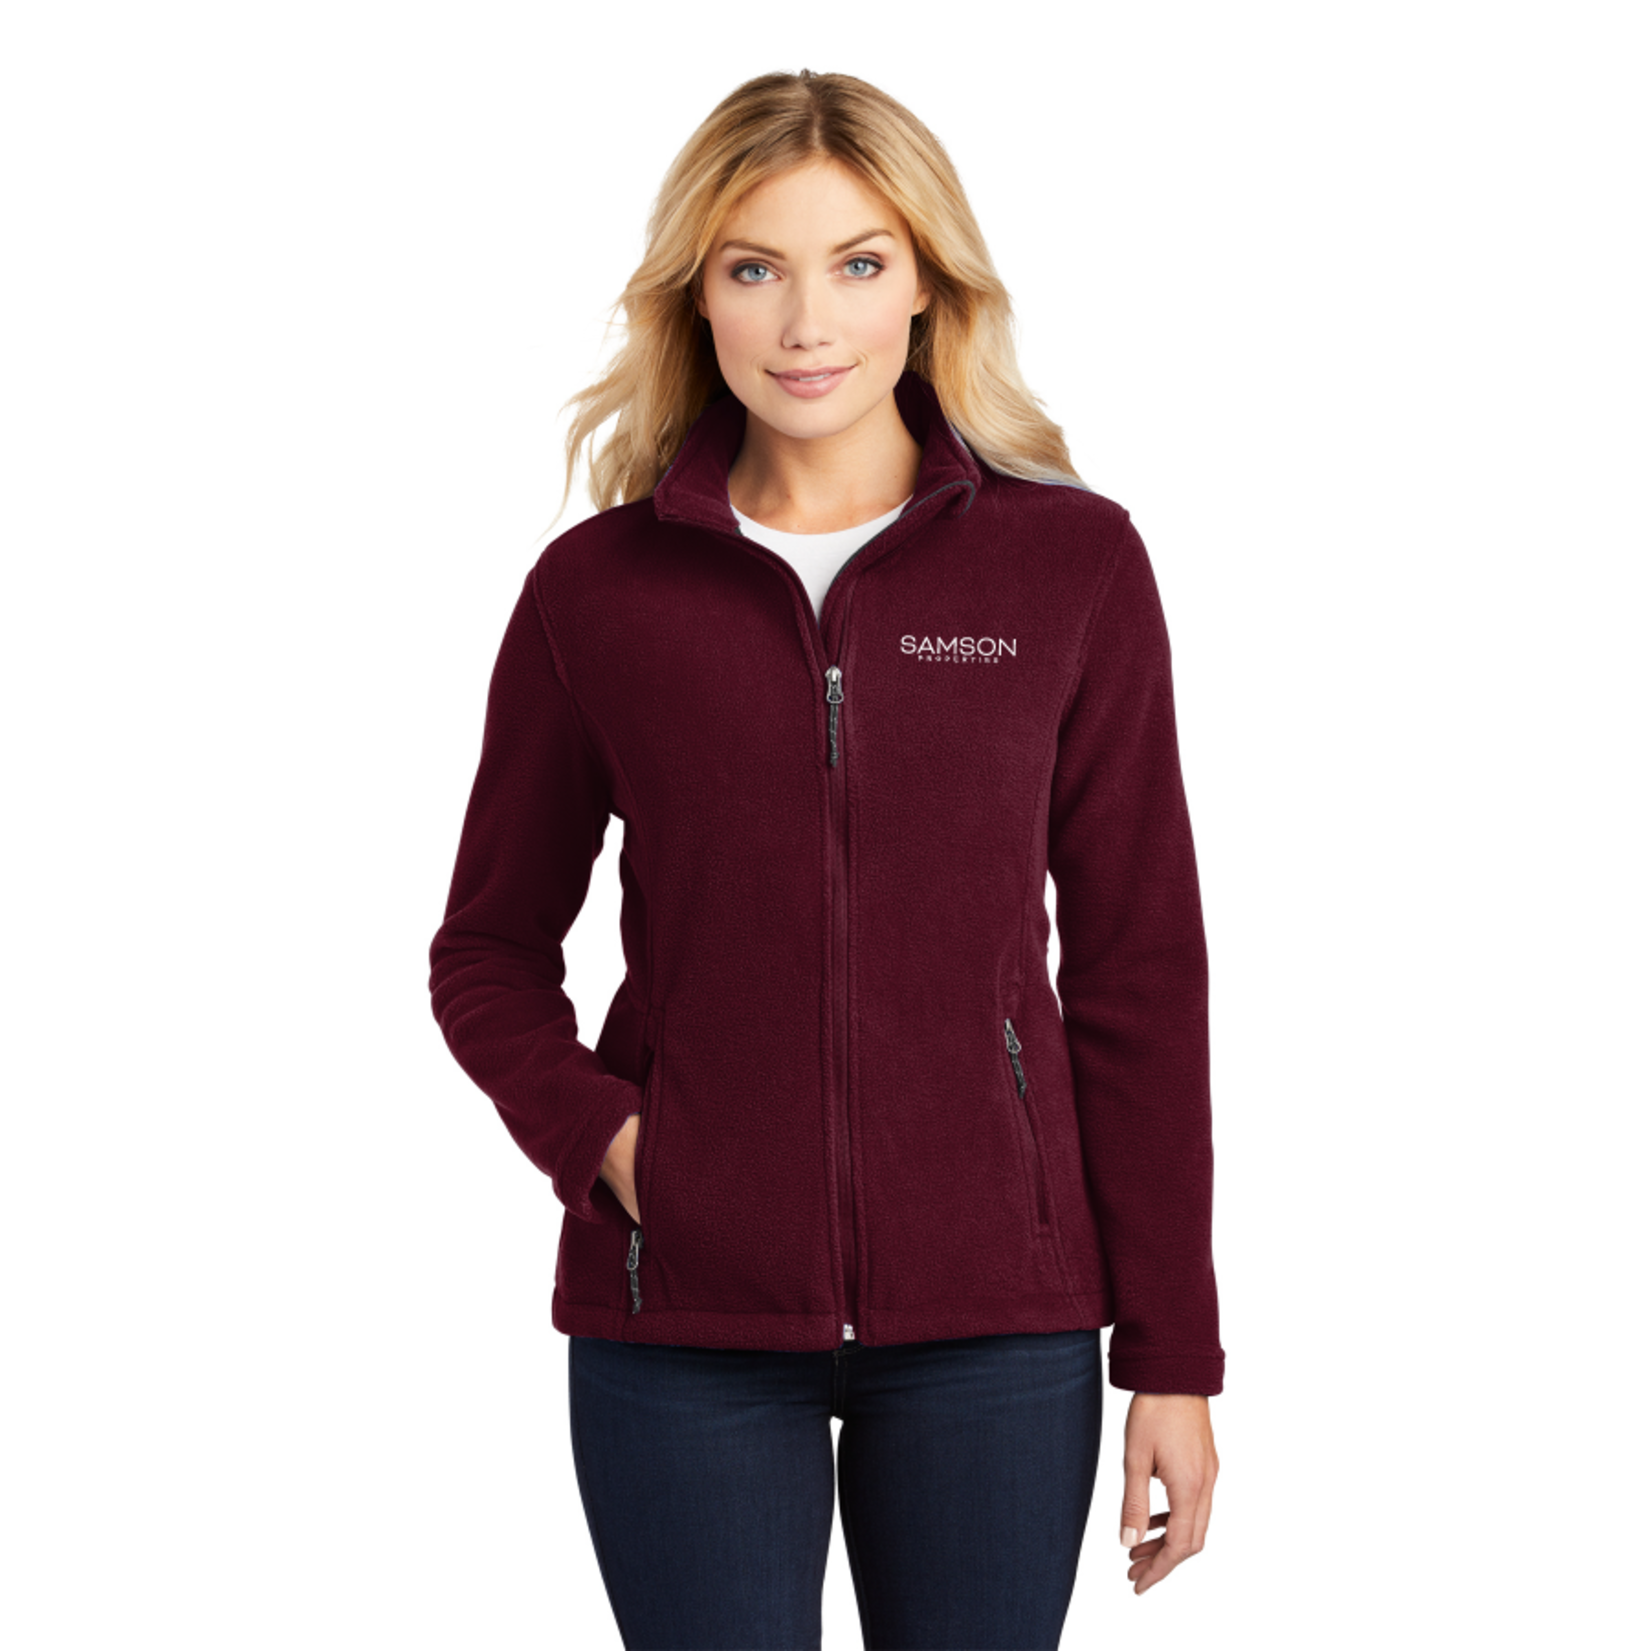 L217 - Port Authority Ladies Value Fleece Jacket - NVA Signs and Striping